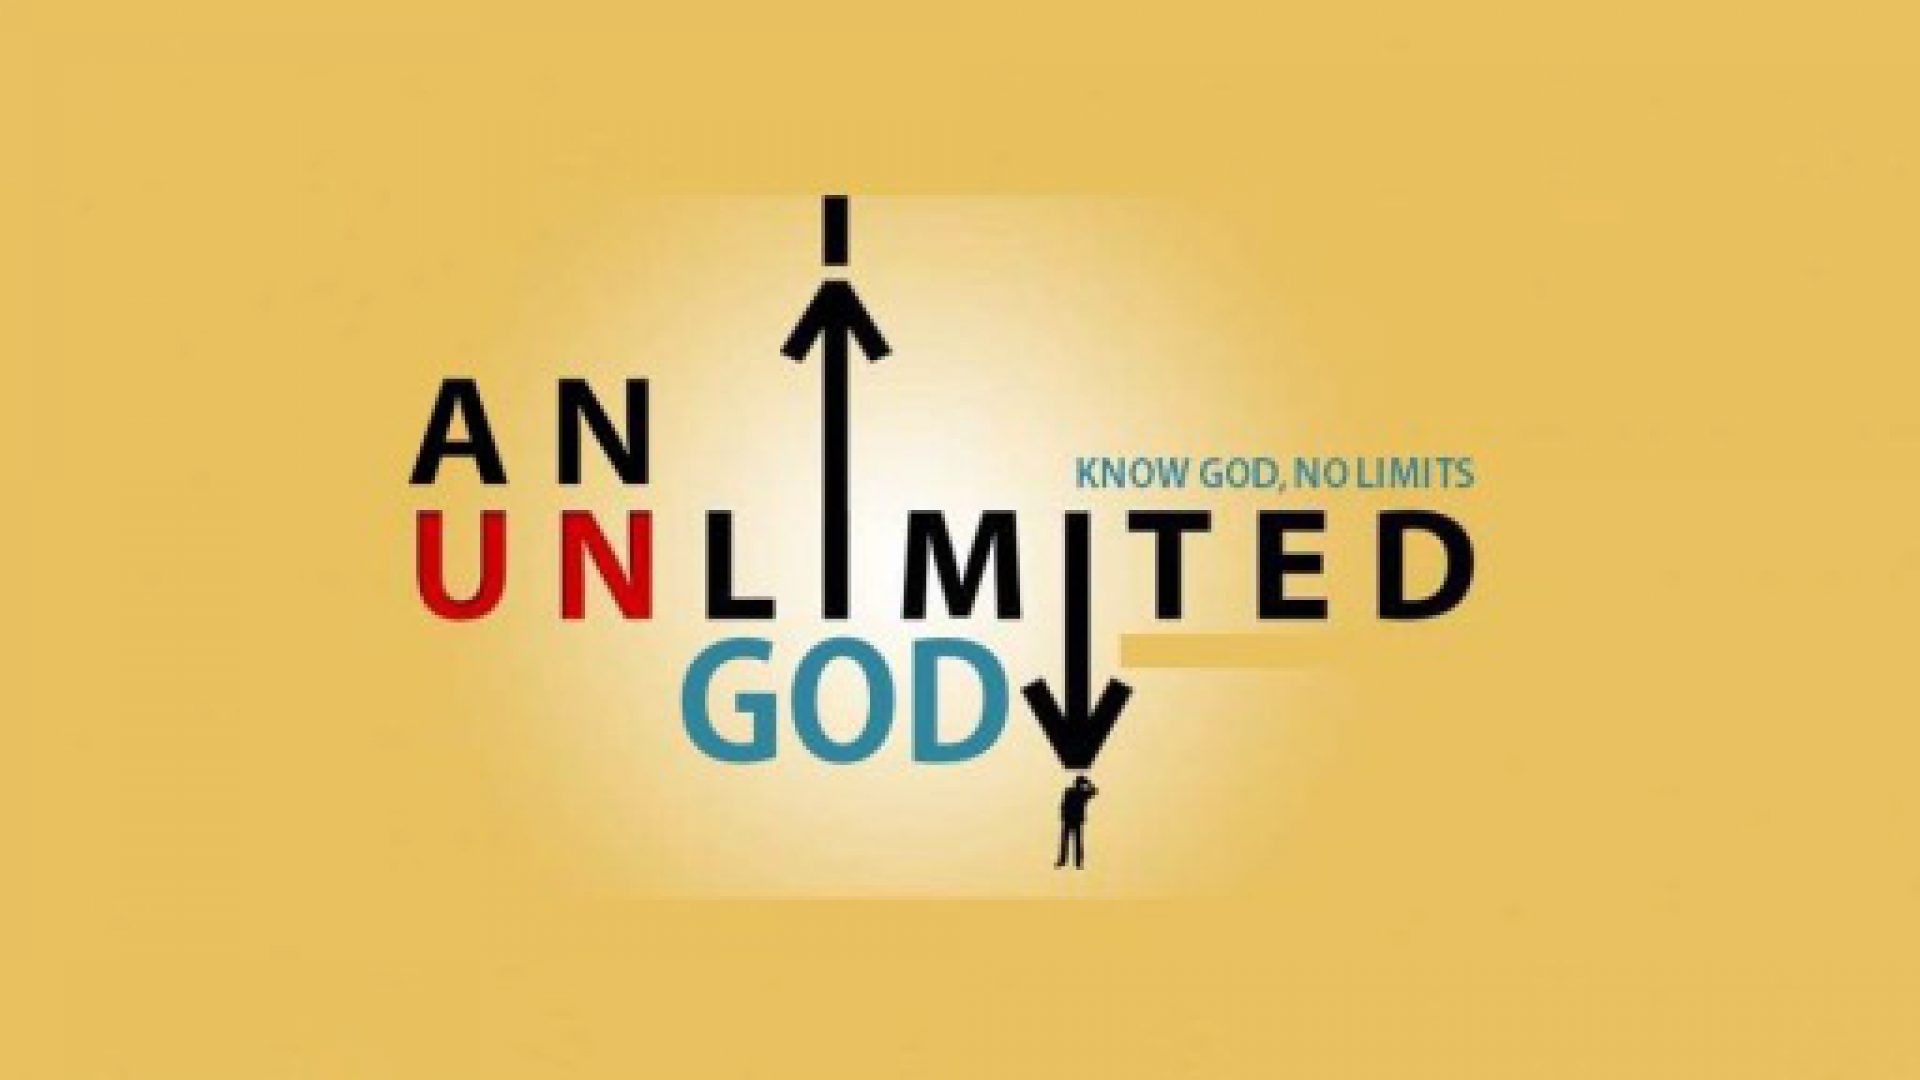 AN UNLIMITED GOD